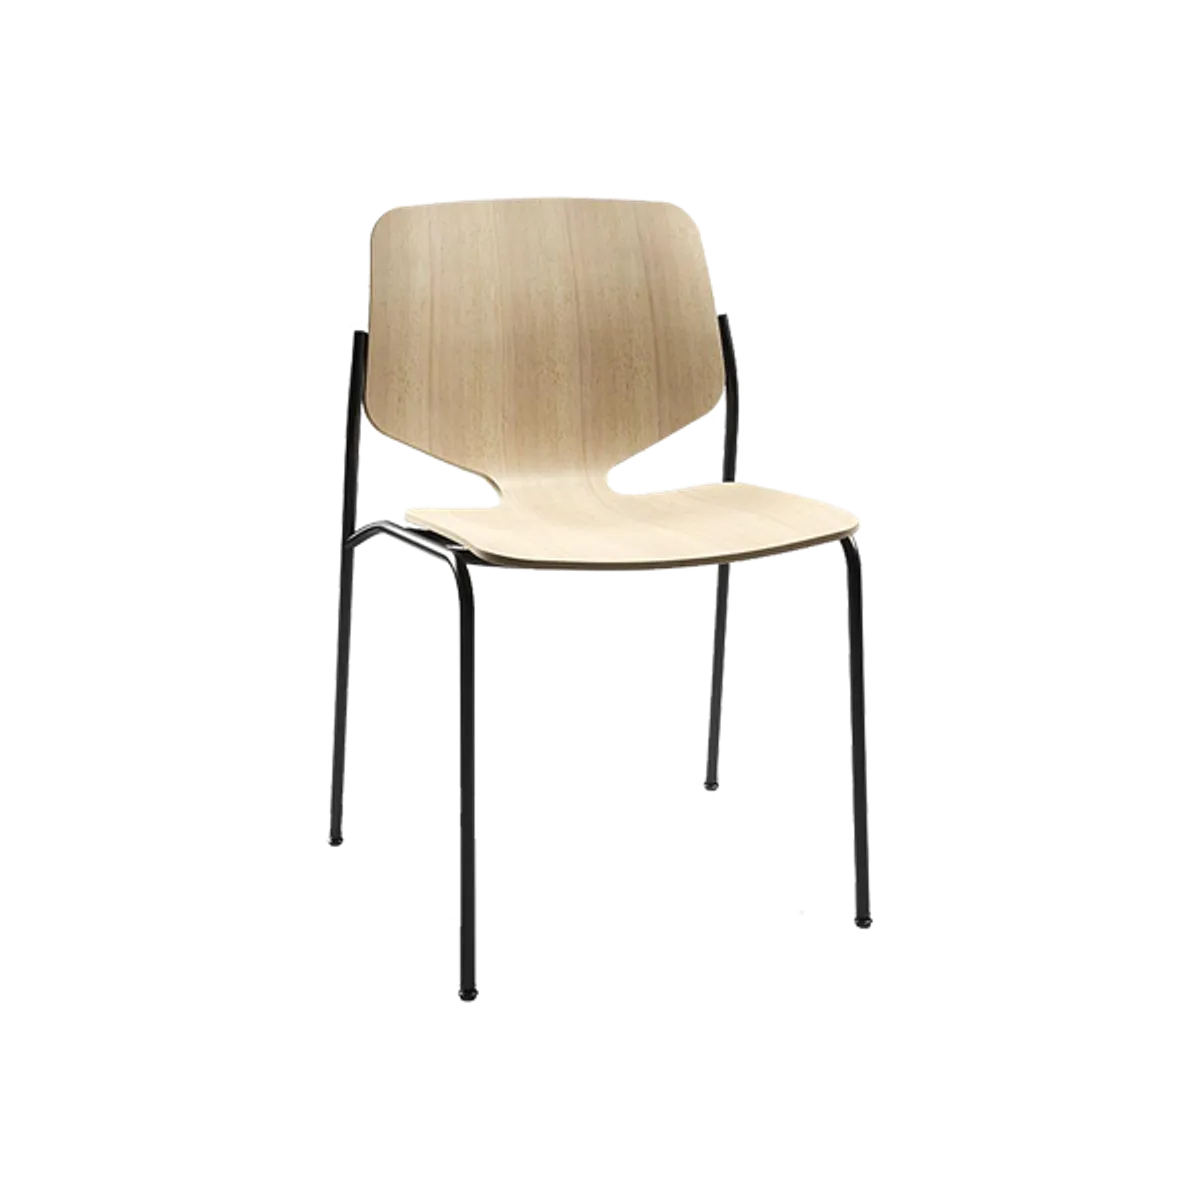 Web Nova Chair Recycled Furniture Cafe Dining Chair In Natural Beech And Black Metal Frame Inside Out Contracts